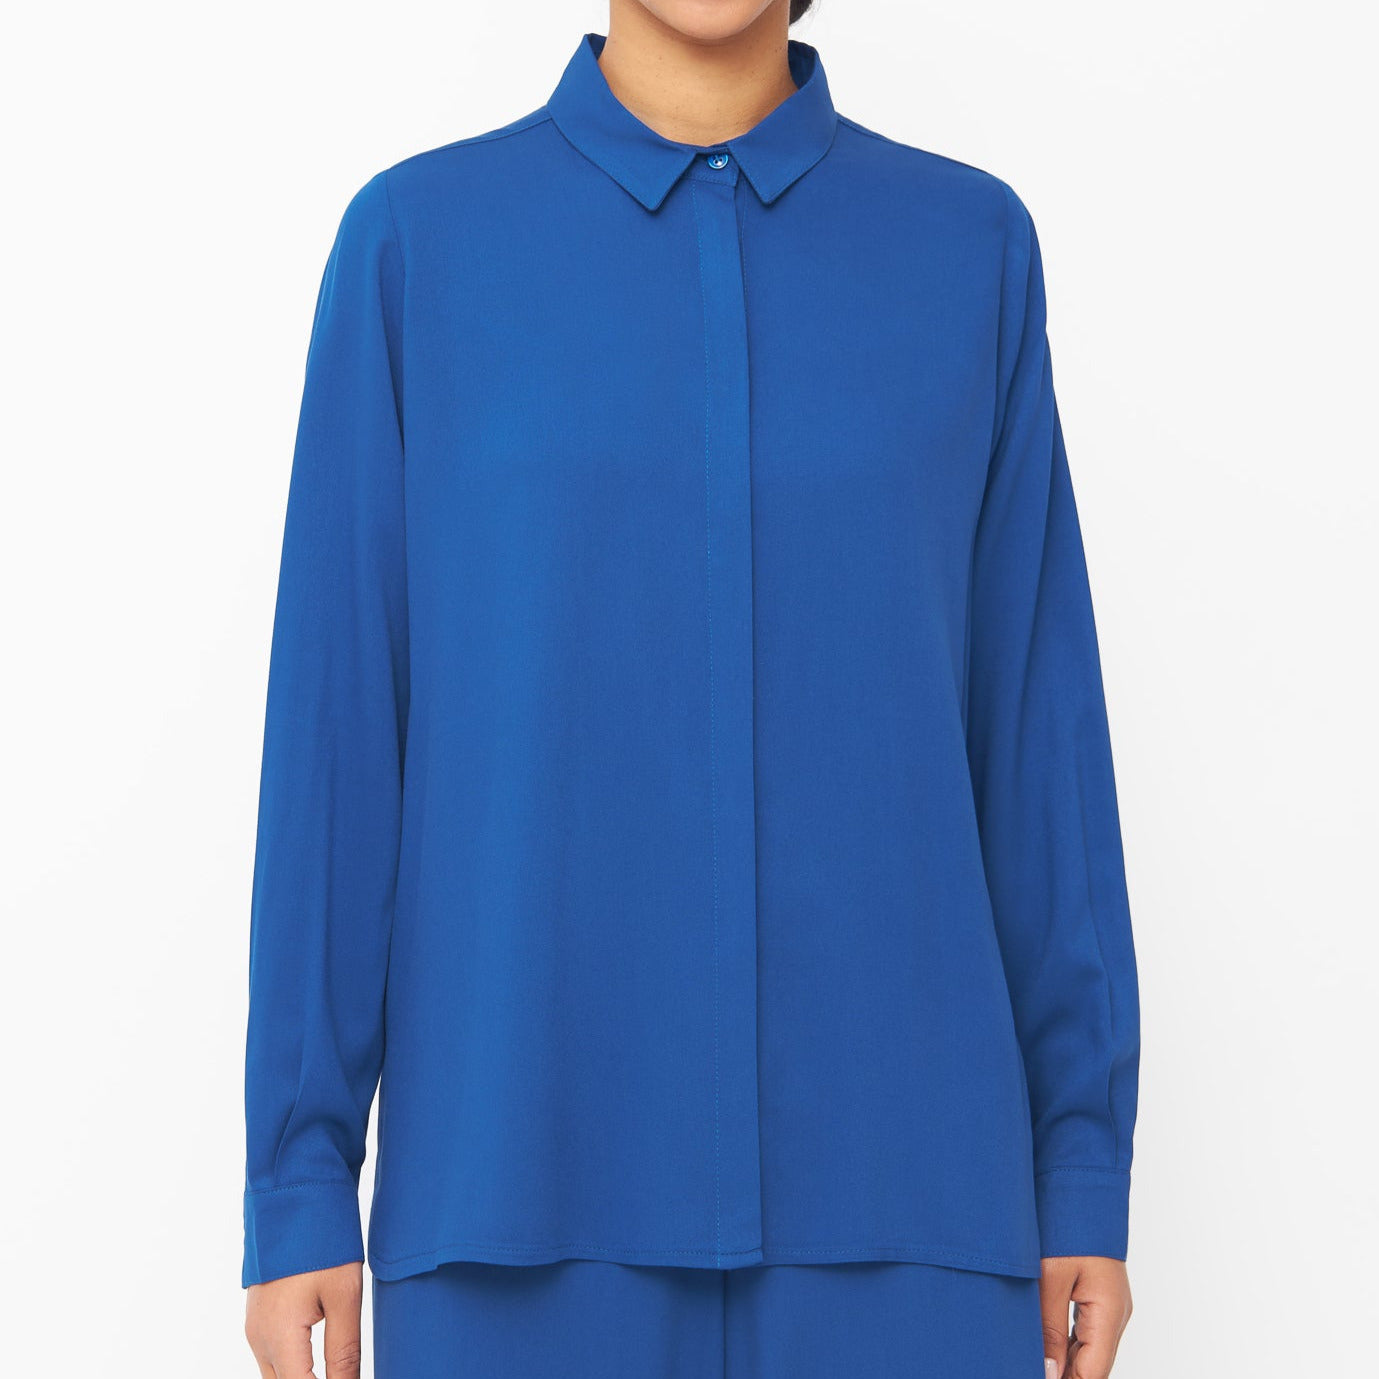 LAST ONE in XL - Givn Iva Blouse - Deep Blue